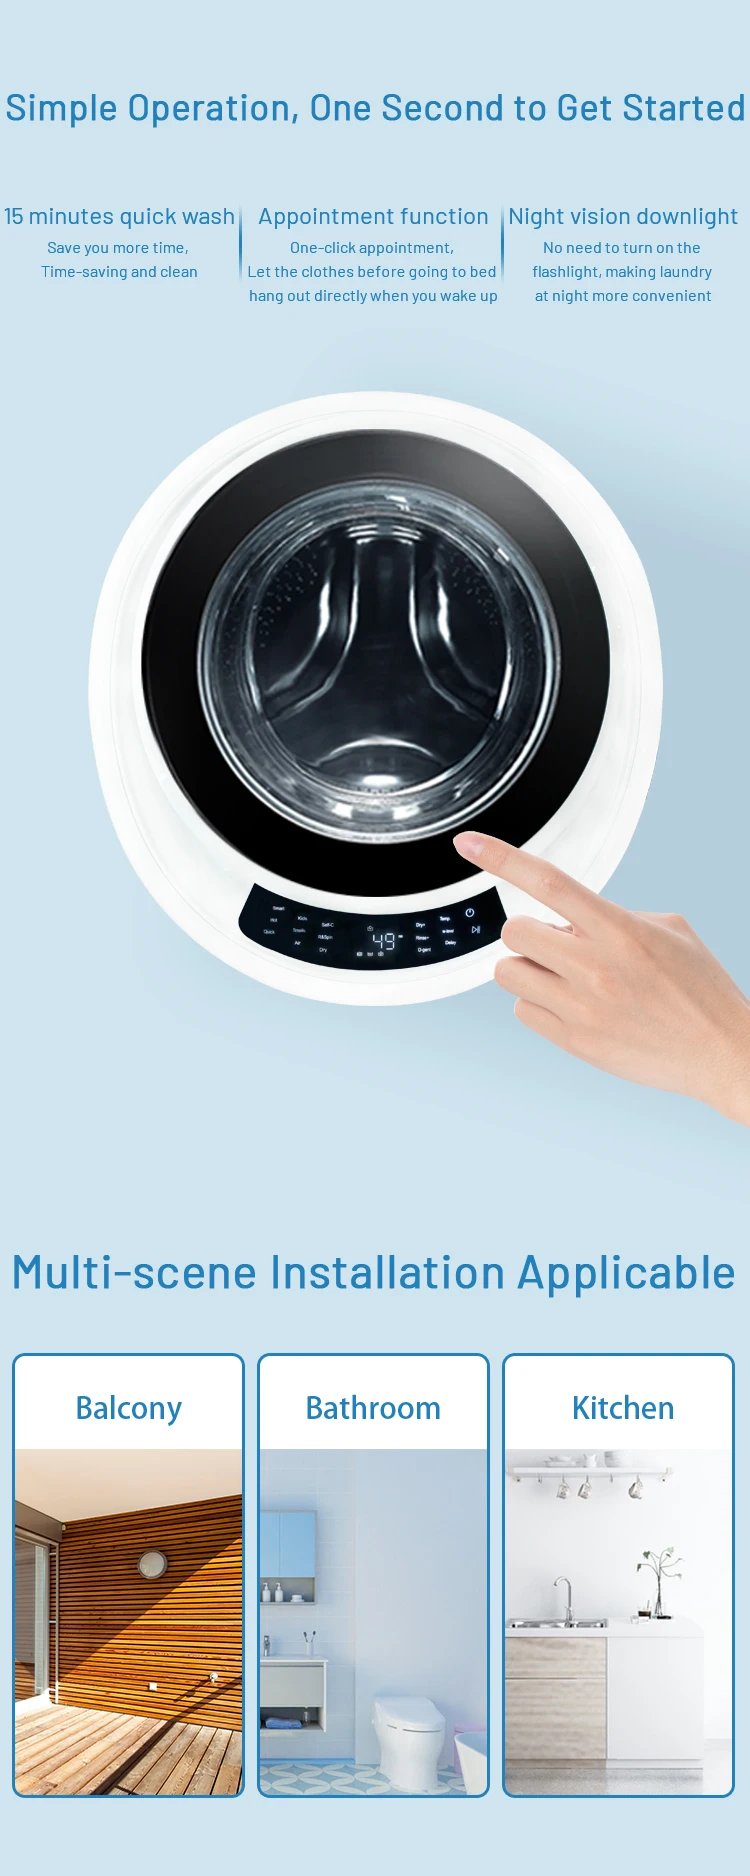 3kg Mini Wall Mounted Automatic Front Loading Washing Machine With Dry